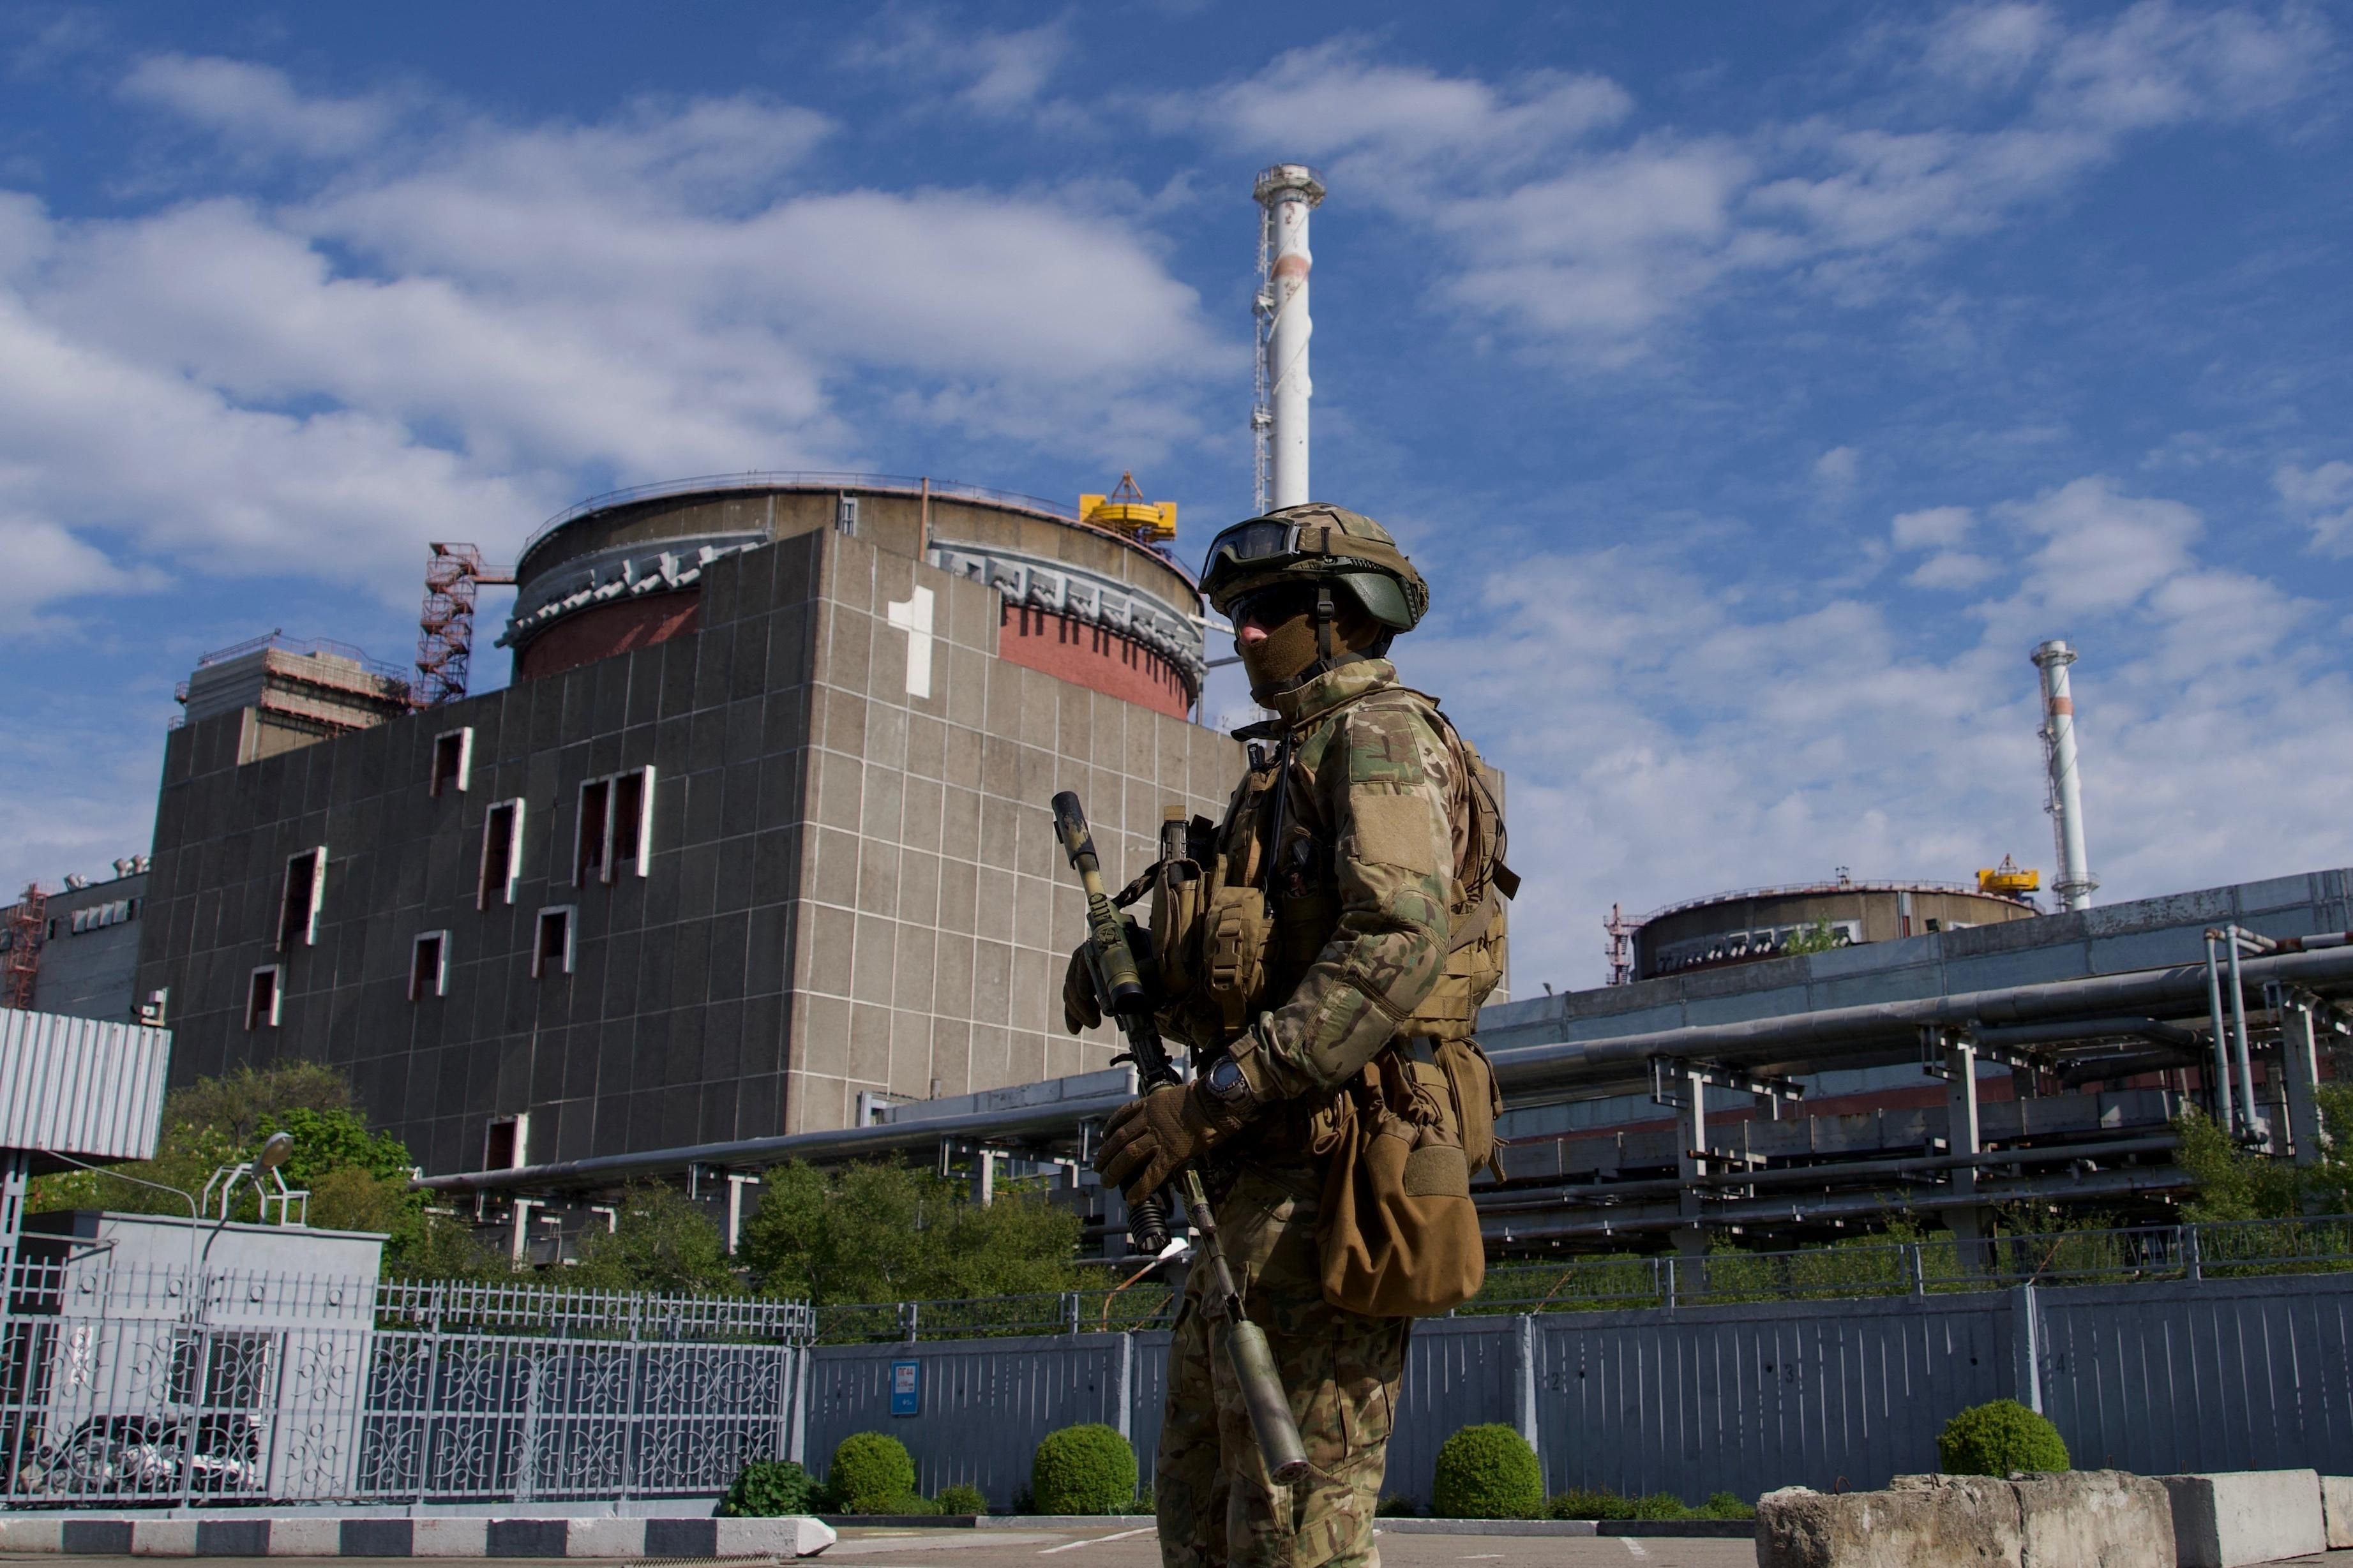 A Russian soldier patrols the territory of the Zaporizhzhia Nuclear Power Station in Energodar, Ukraine on May 1, 2022.